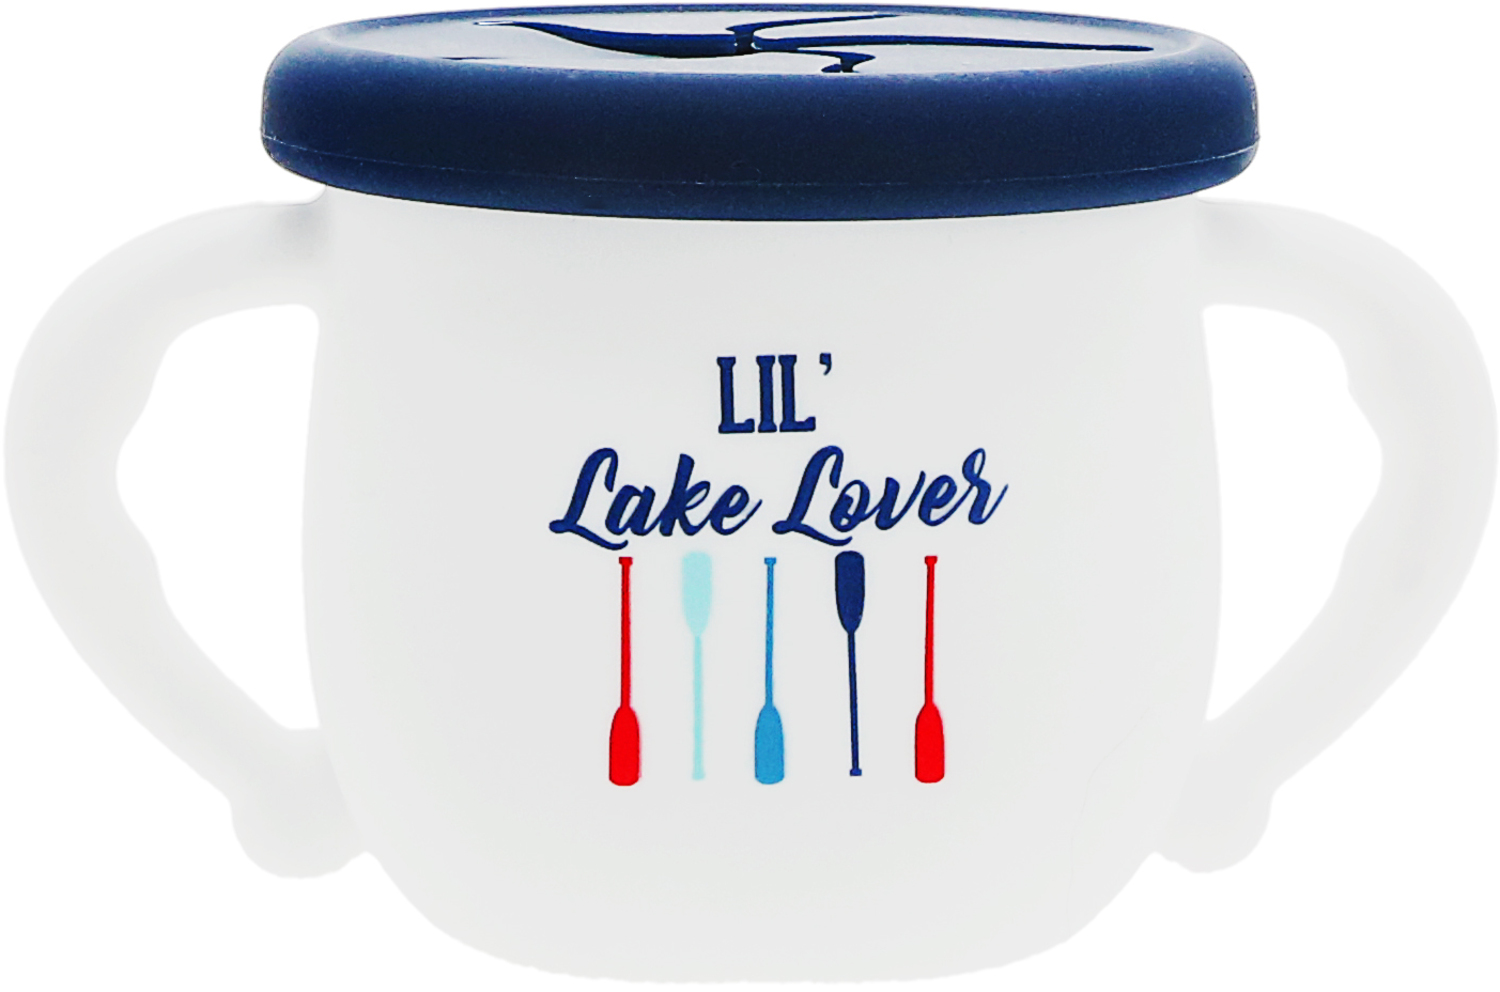 Lake Lover by We Baby - Lake Lover - 3.5" Silicone Snack Bowl with Lid